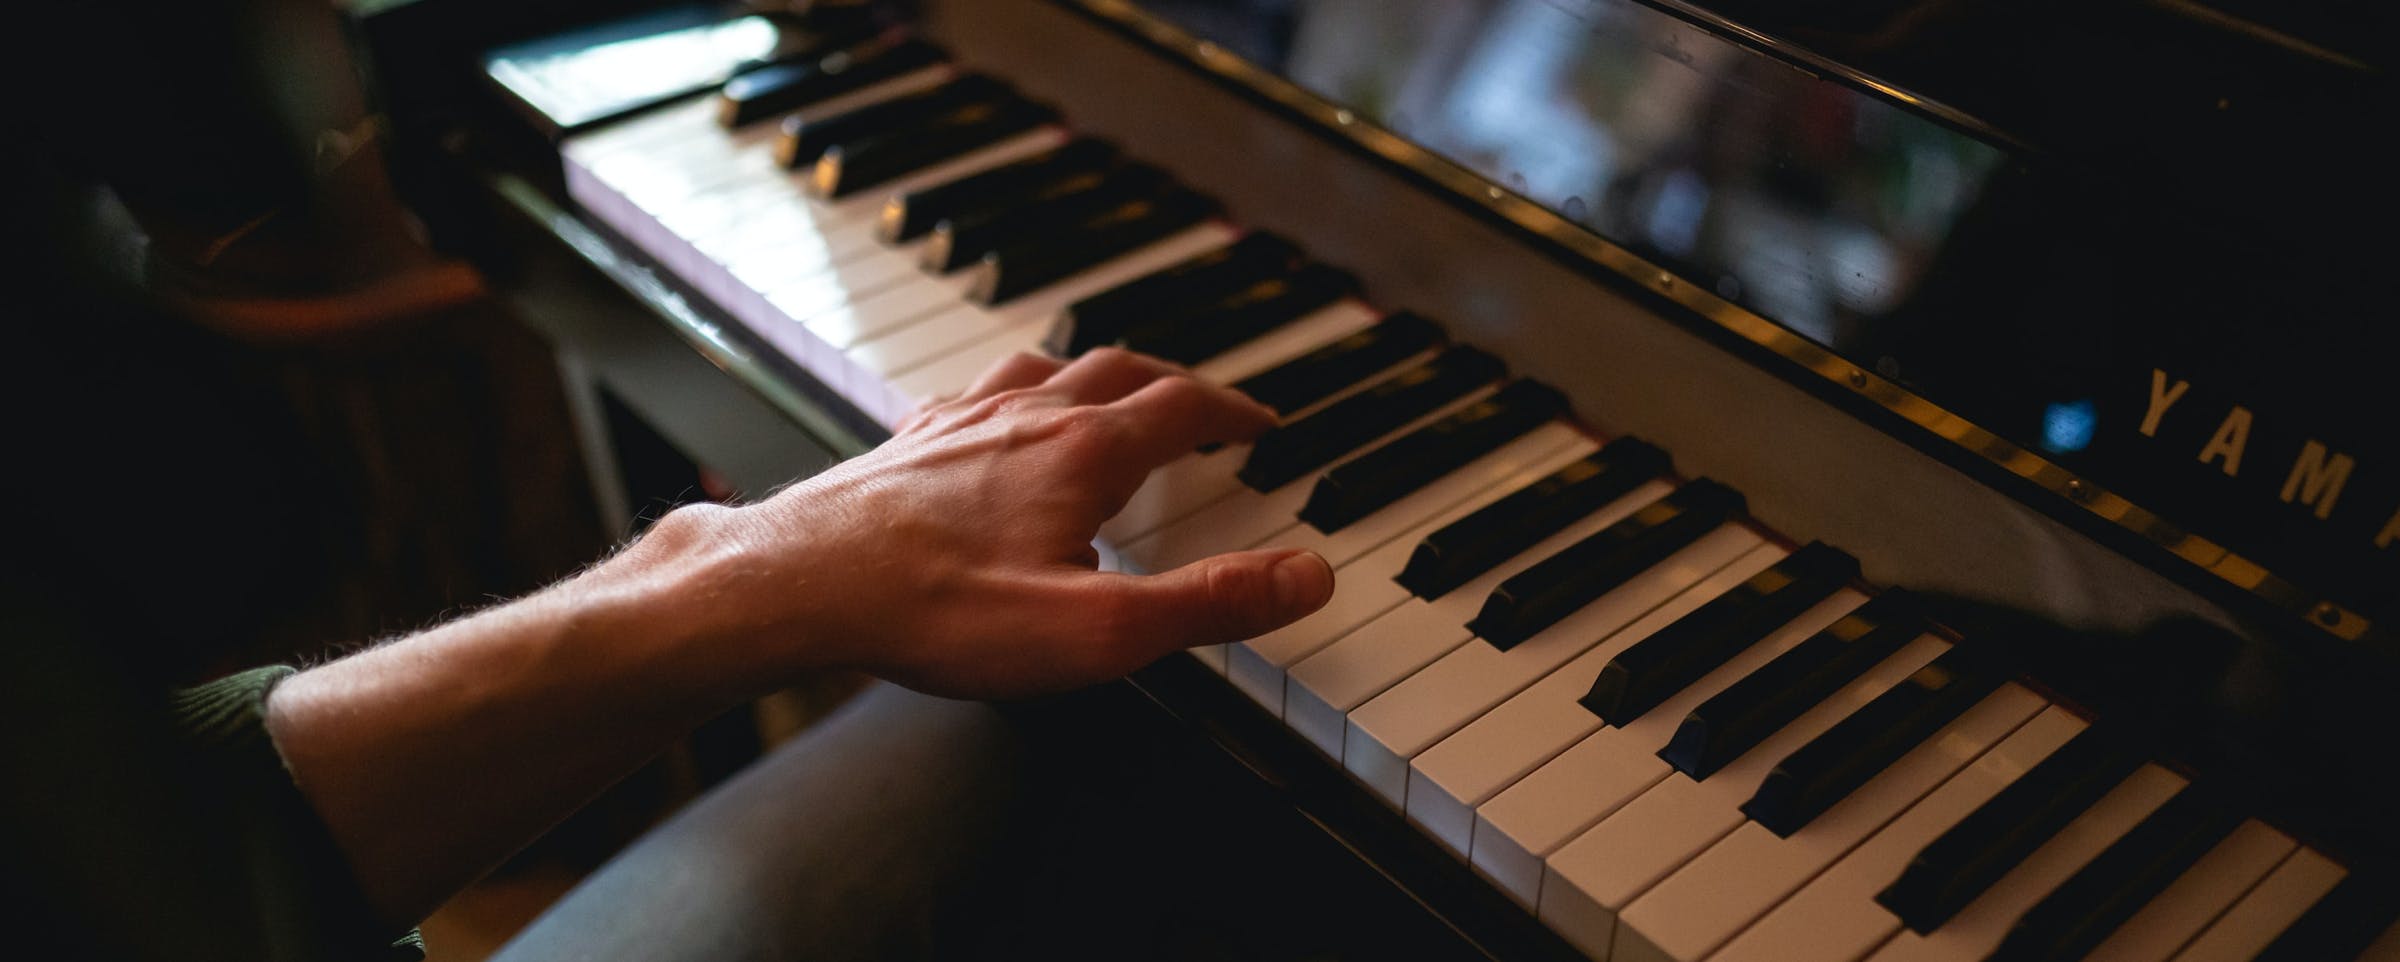 A left hand plays on an old Yamaha piano 